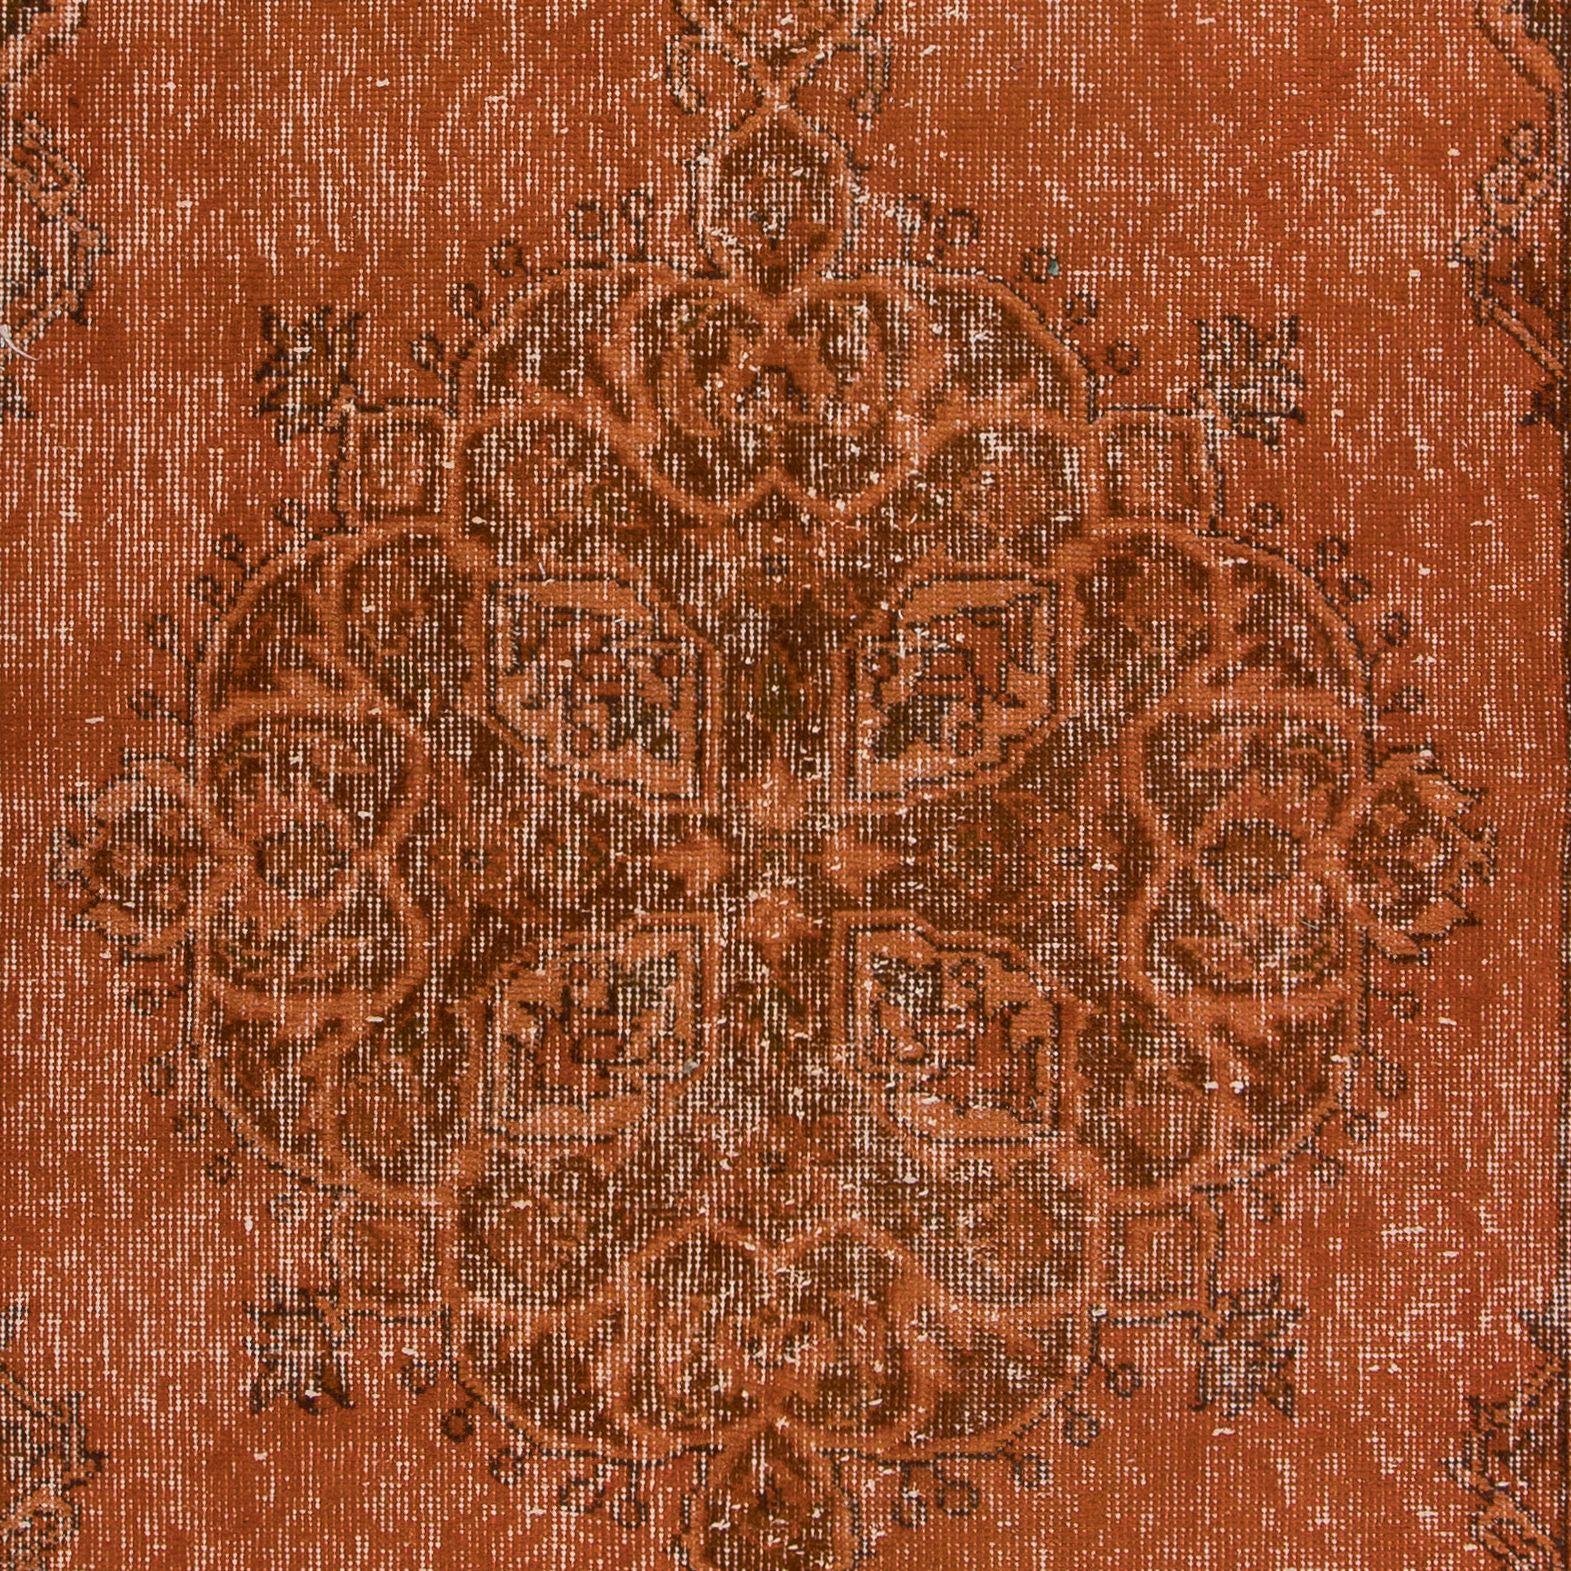 Turkish 4x6.6 Ft Orange Handmade Accent Rug with Medallion Desig, Small Wool Carpet For Sale